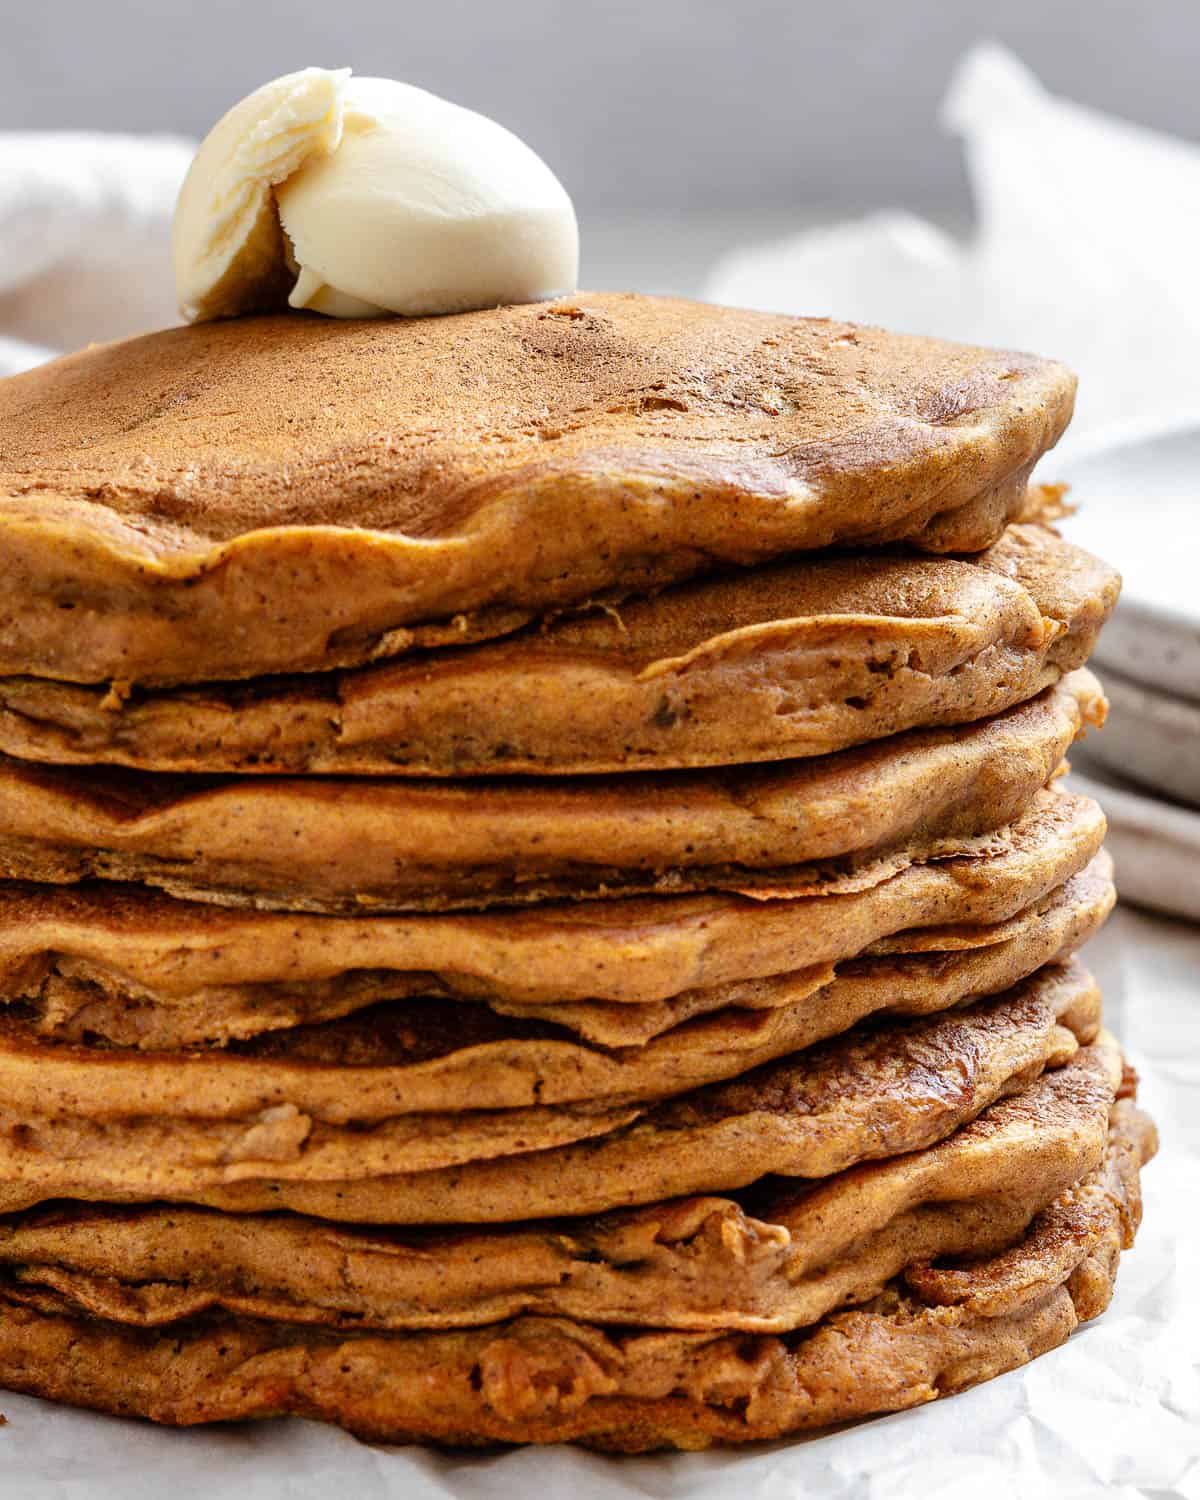 completed stack of Easy Sweet Potato Pancakes (Vegan) a،nst a light surface